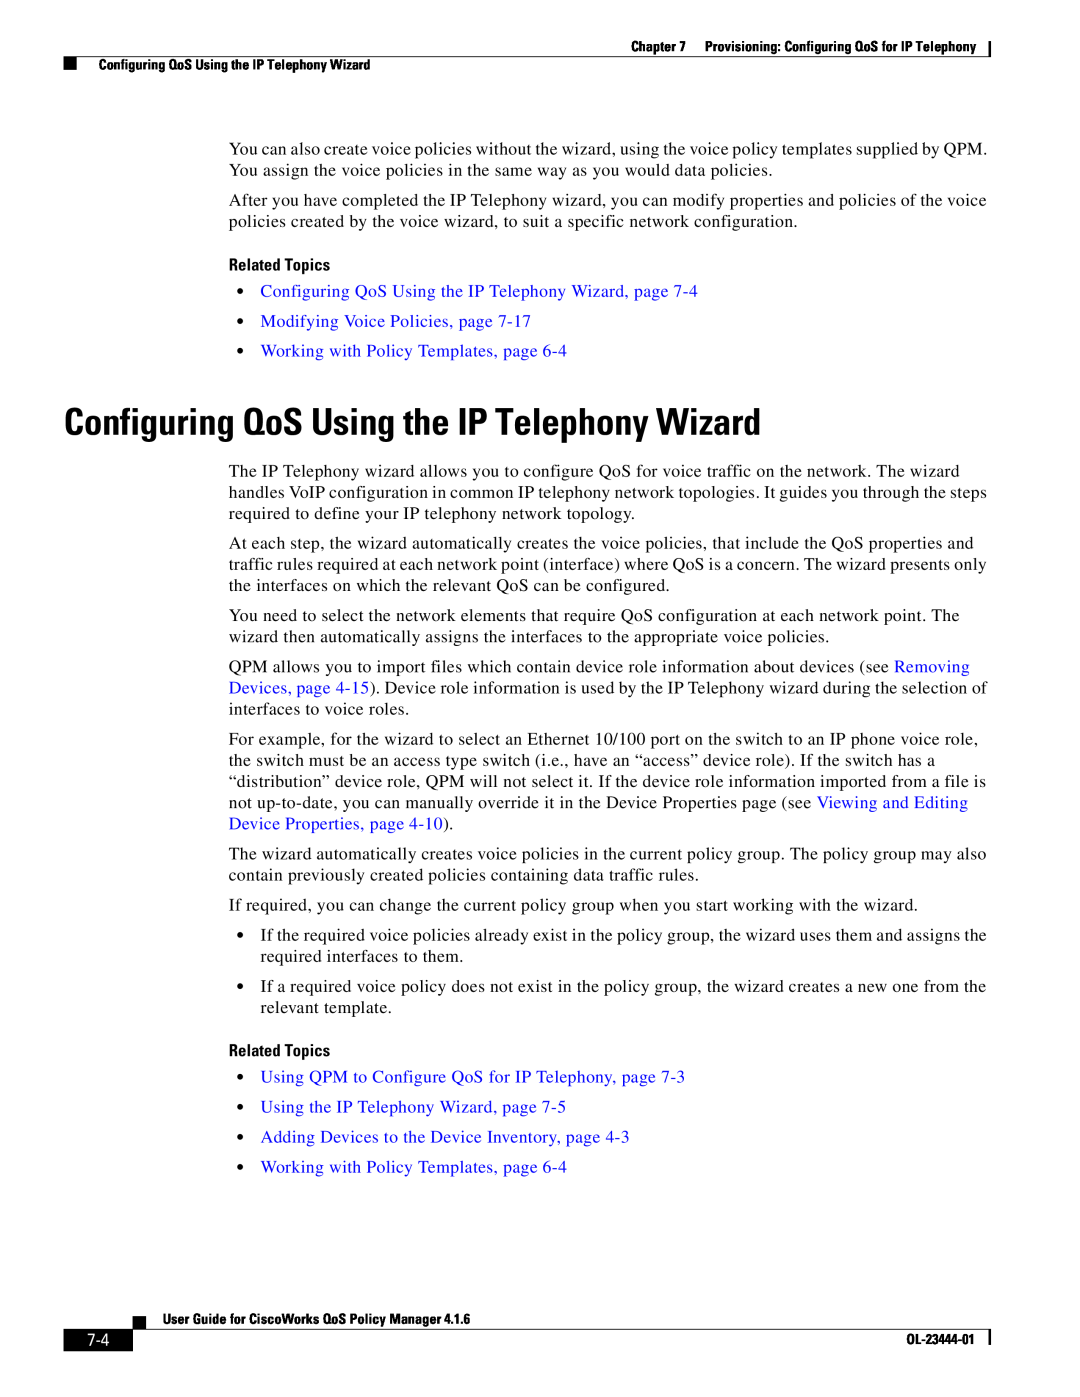 Cisco Systems 416 manual Configuring QoS Using the IP Telephony Wizard, Using the IP Telephony Wizard, page, Related Topics 